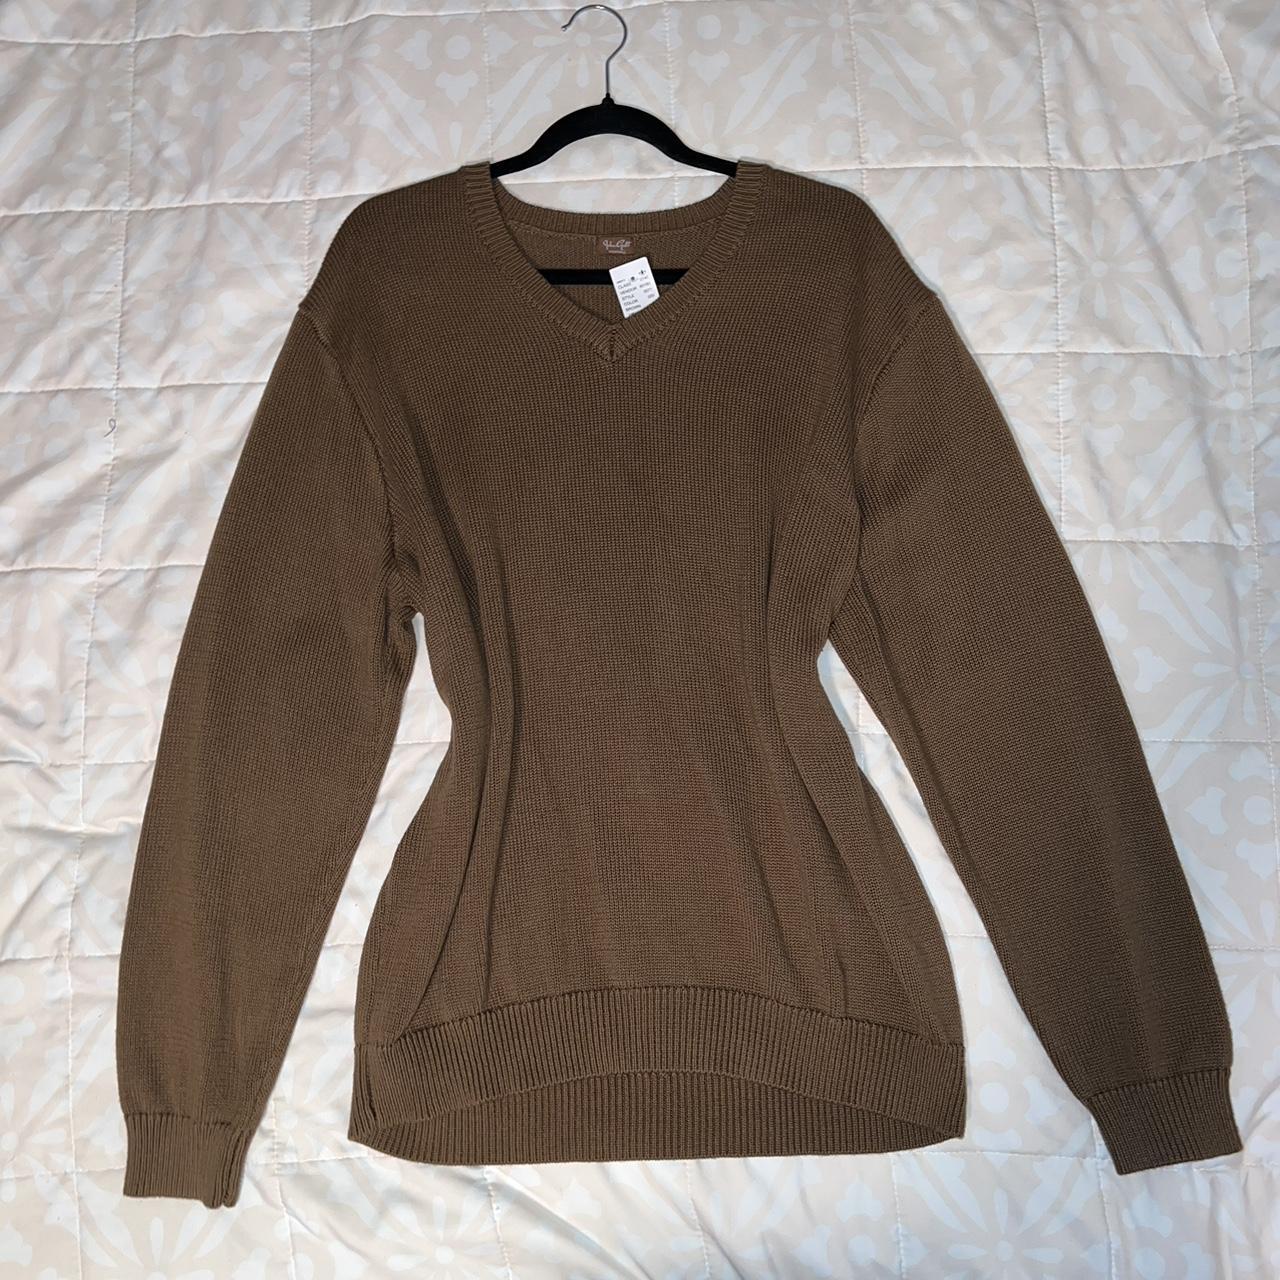 Brandy Melville Brown V Neck Knit Sweater Pullover one size